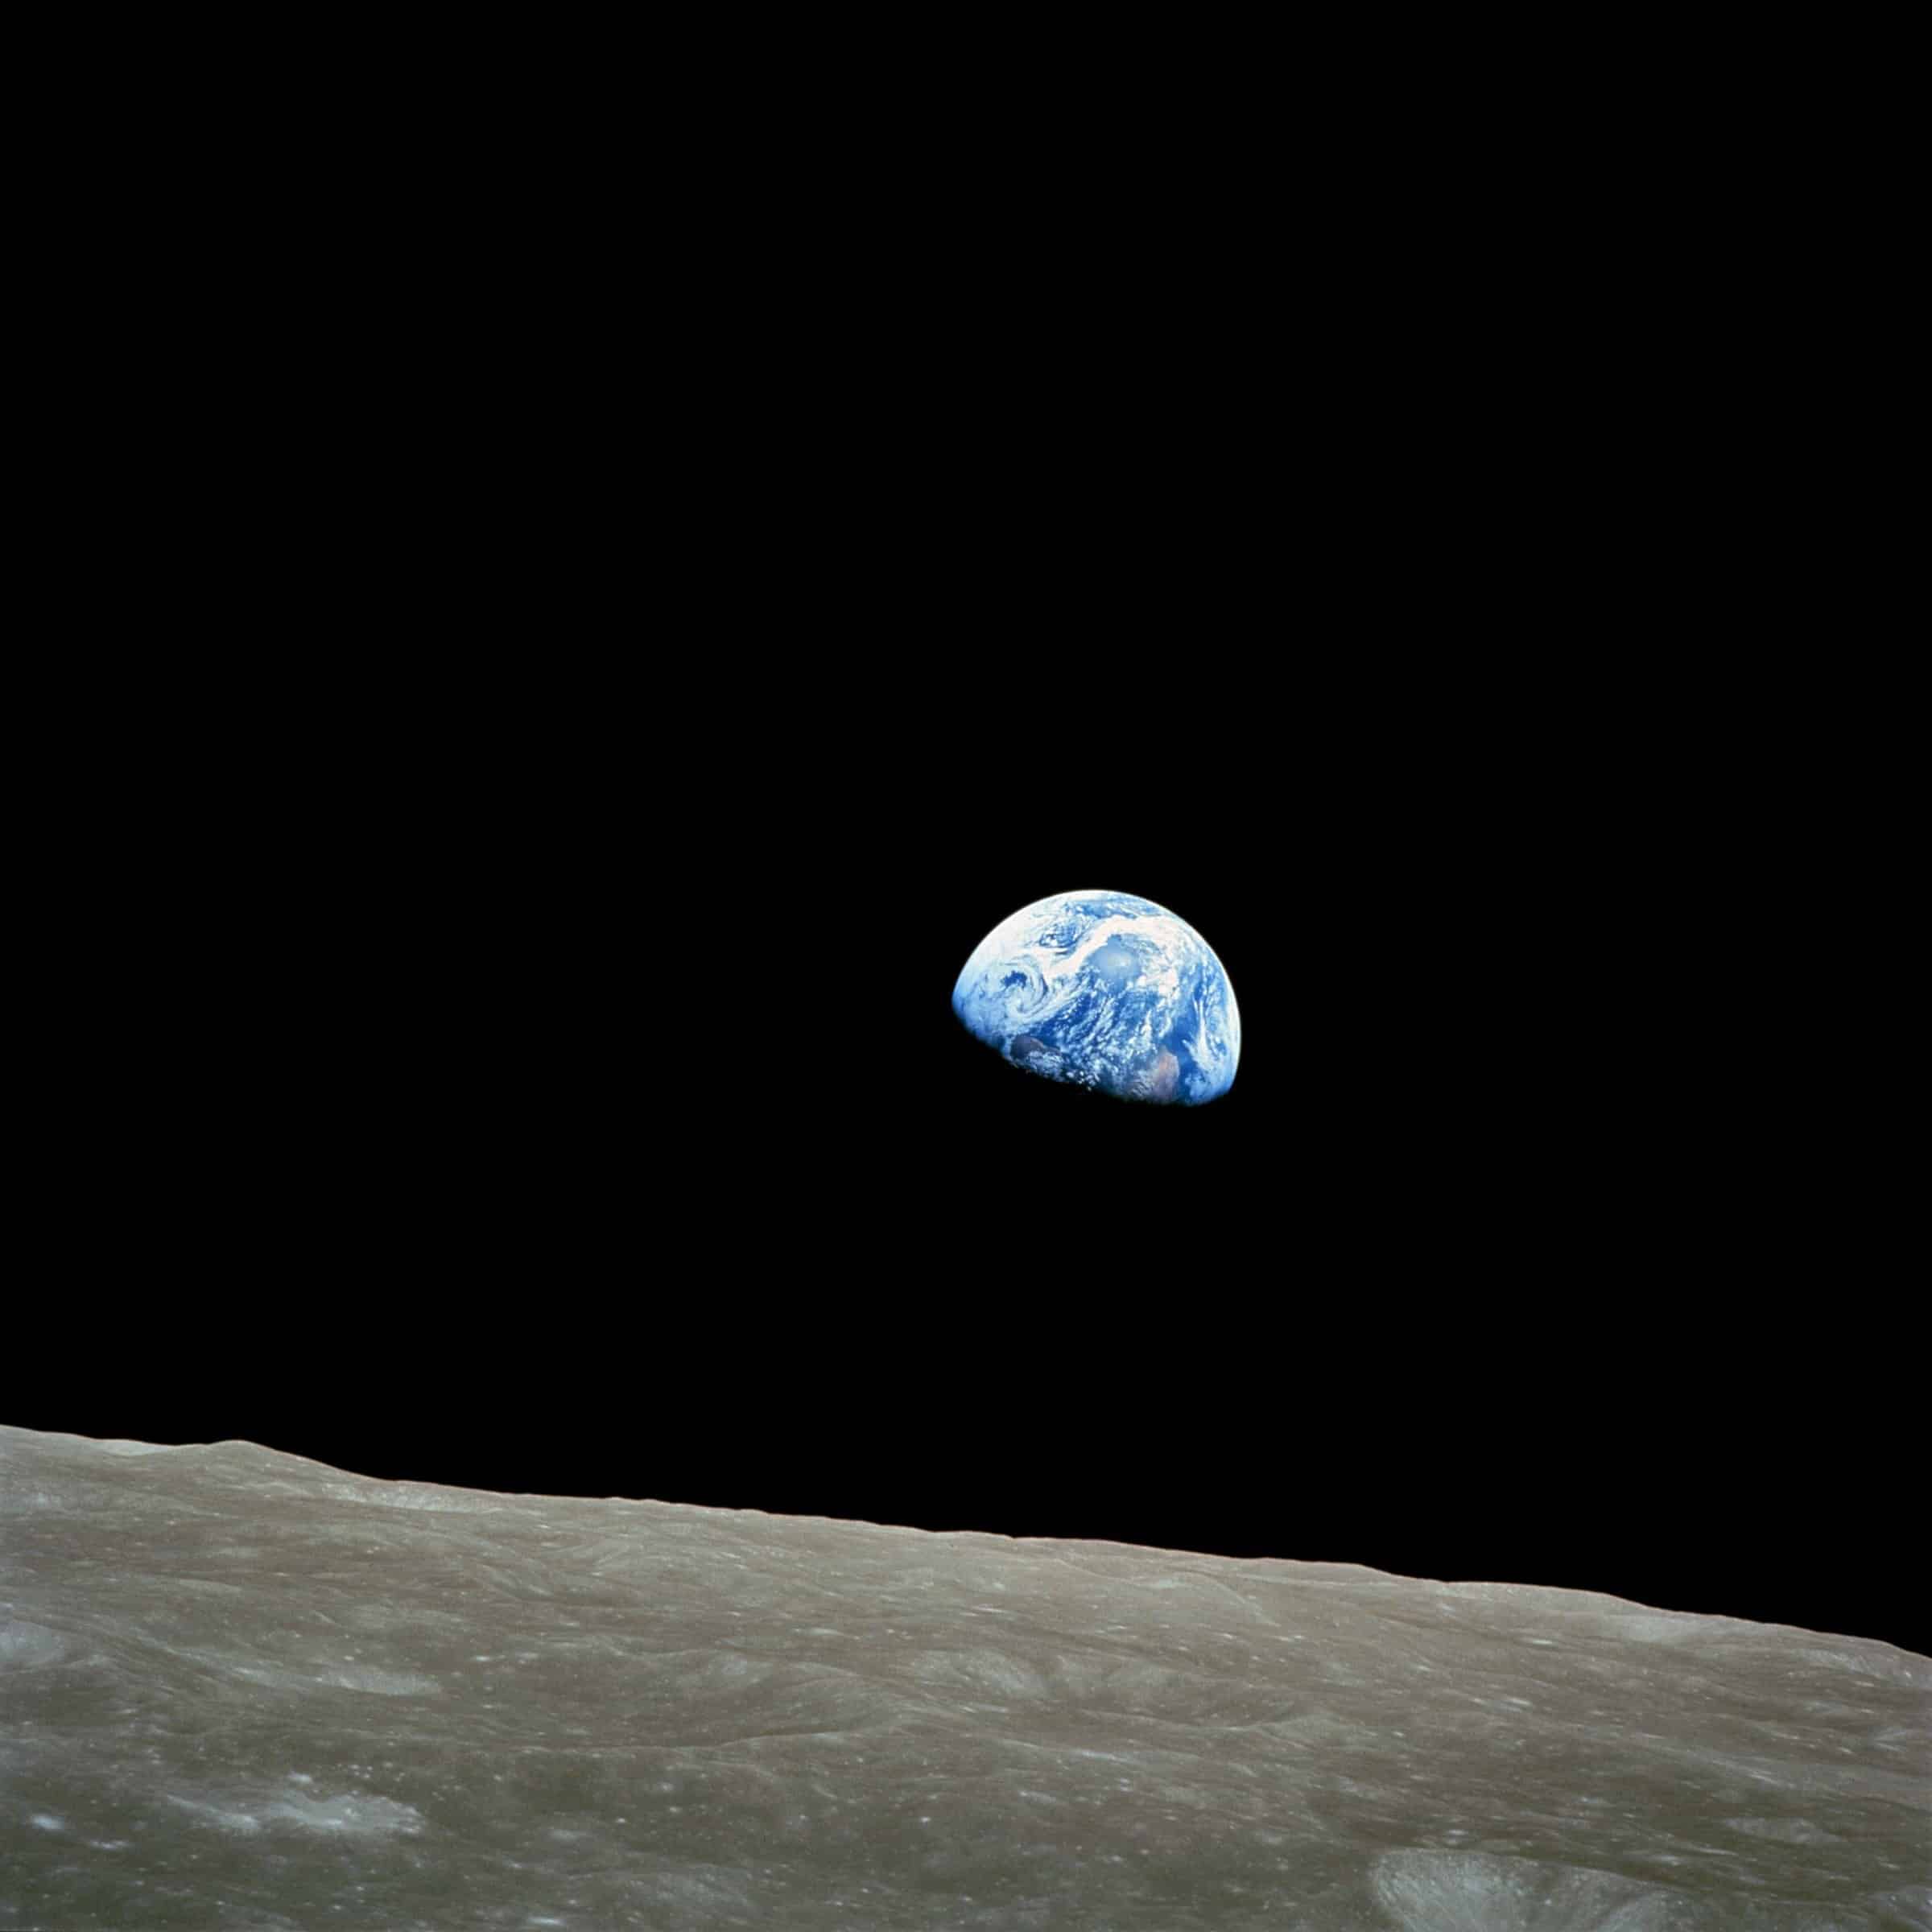 An image of the Earth 